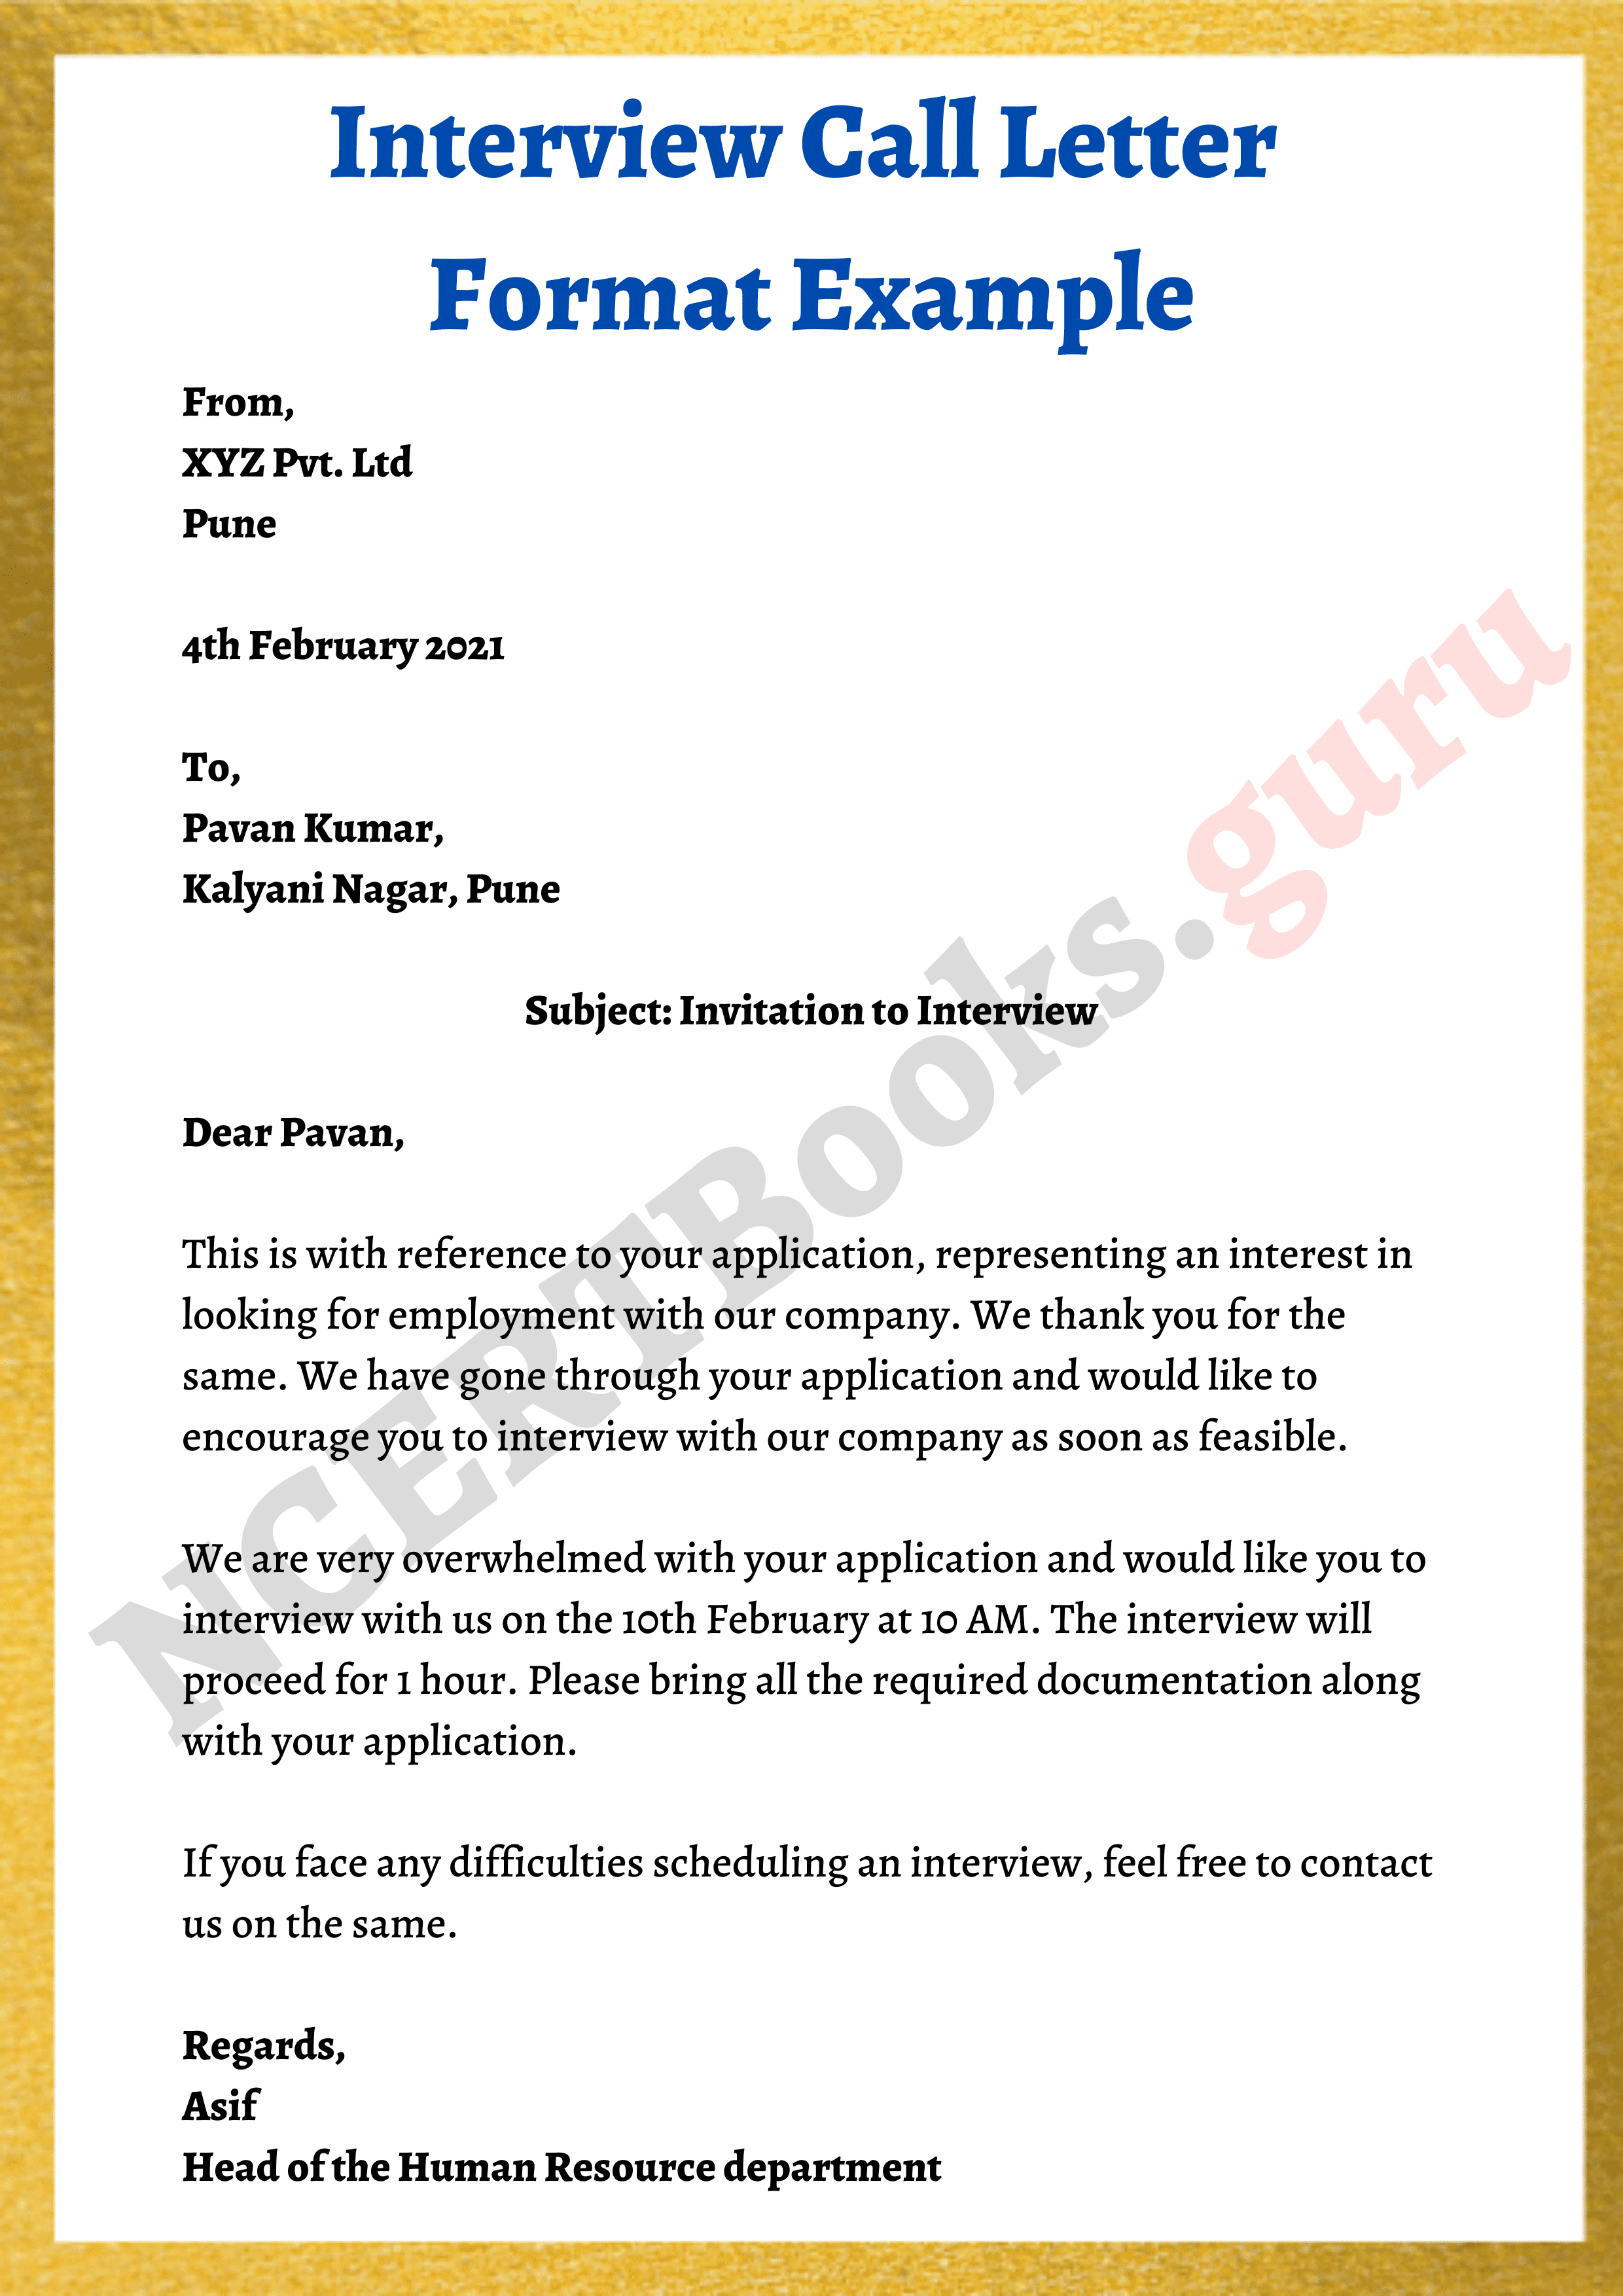 Interview Call Letter Format Example